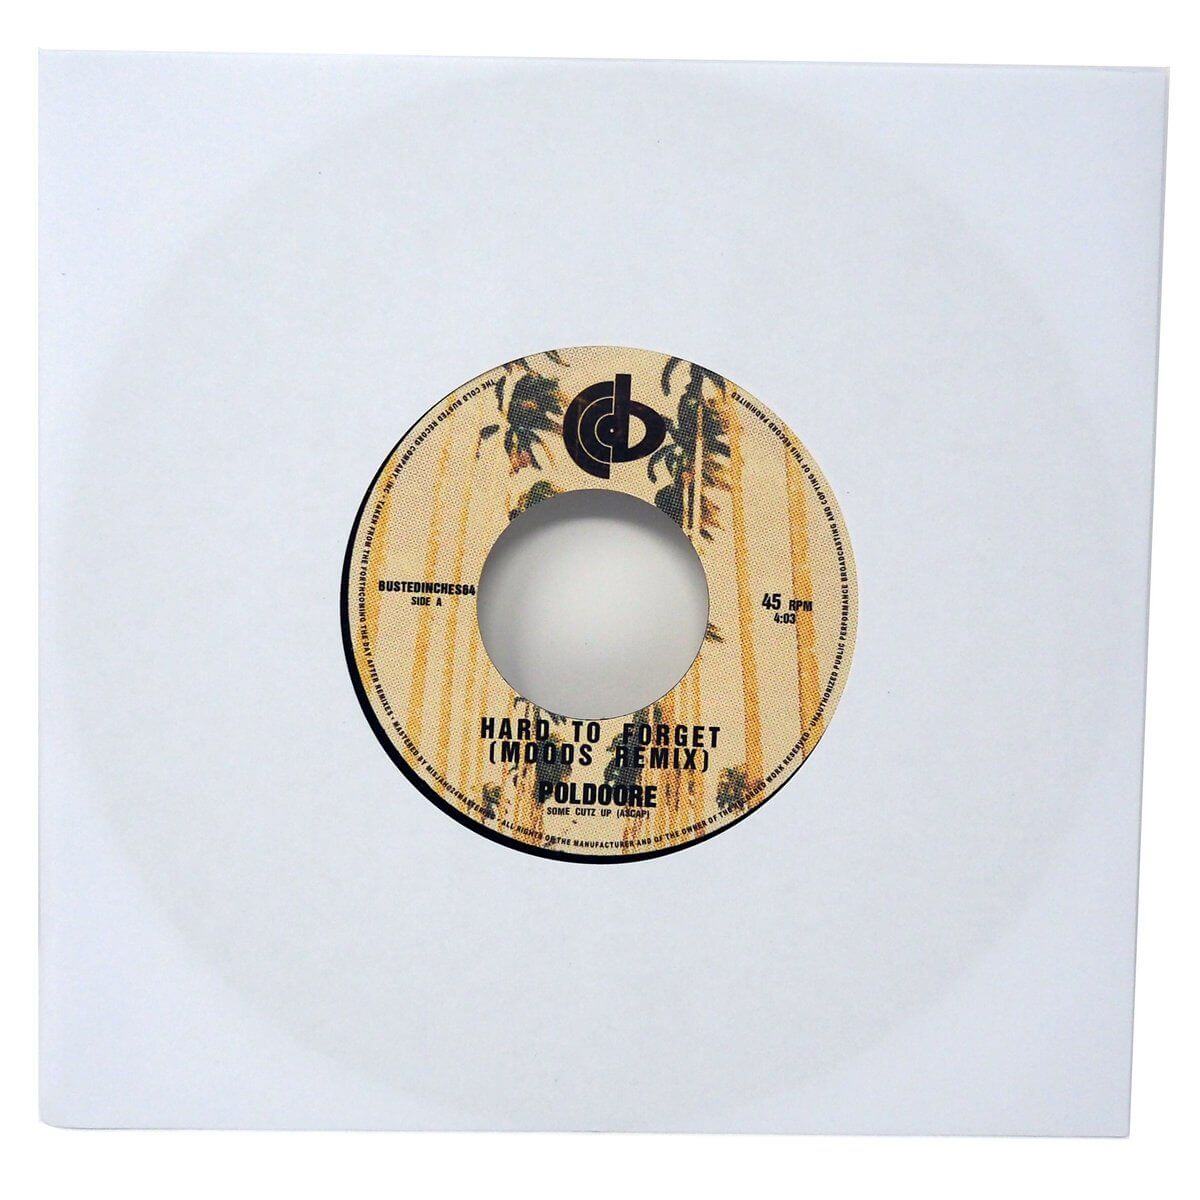 Poldoore - Hard To Forget / Midnight In Saigon Remixes - Limited Edition 7 Inch Vinyl - Cold Busted